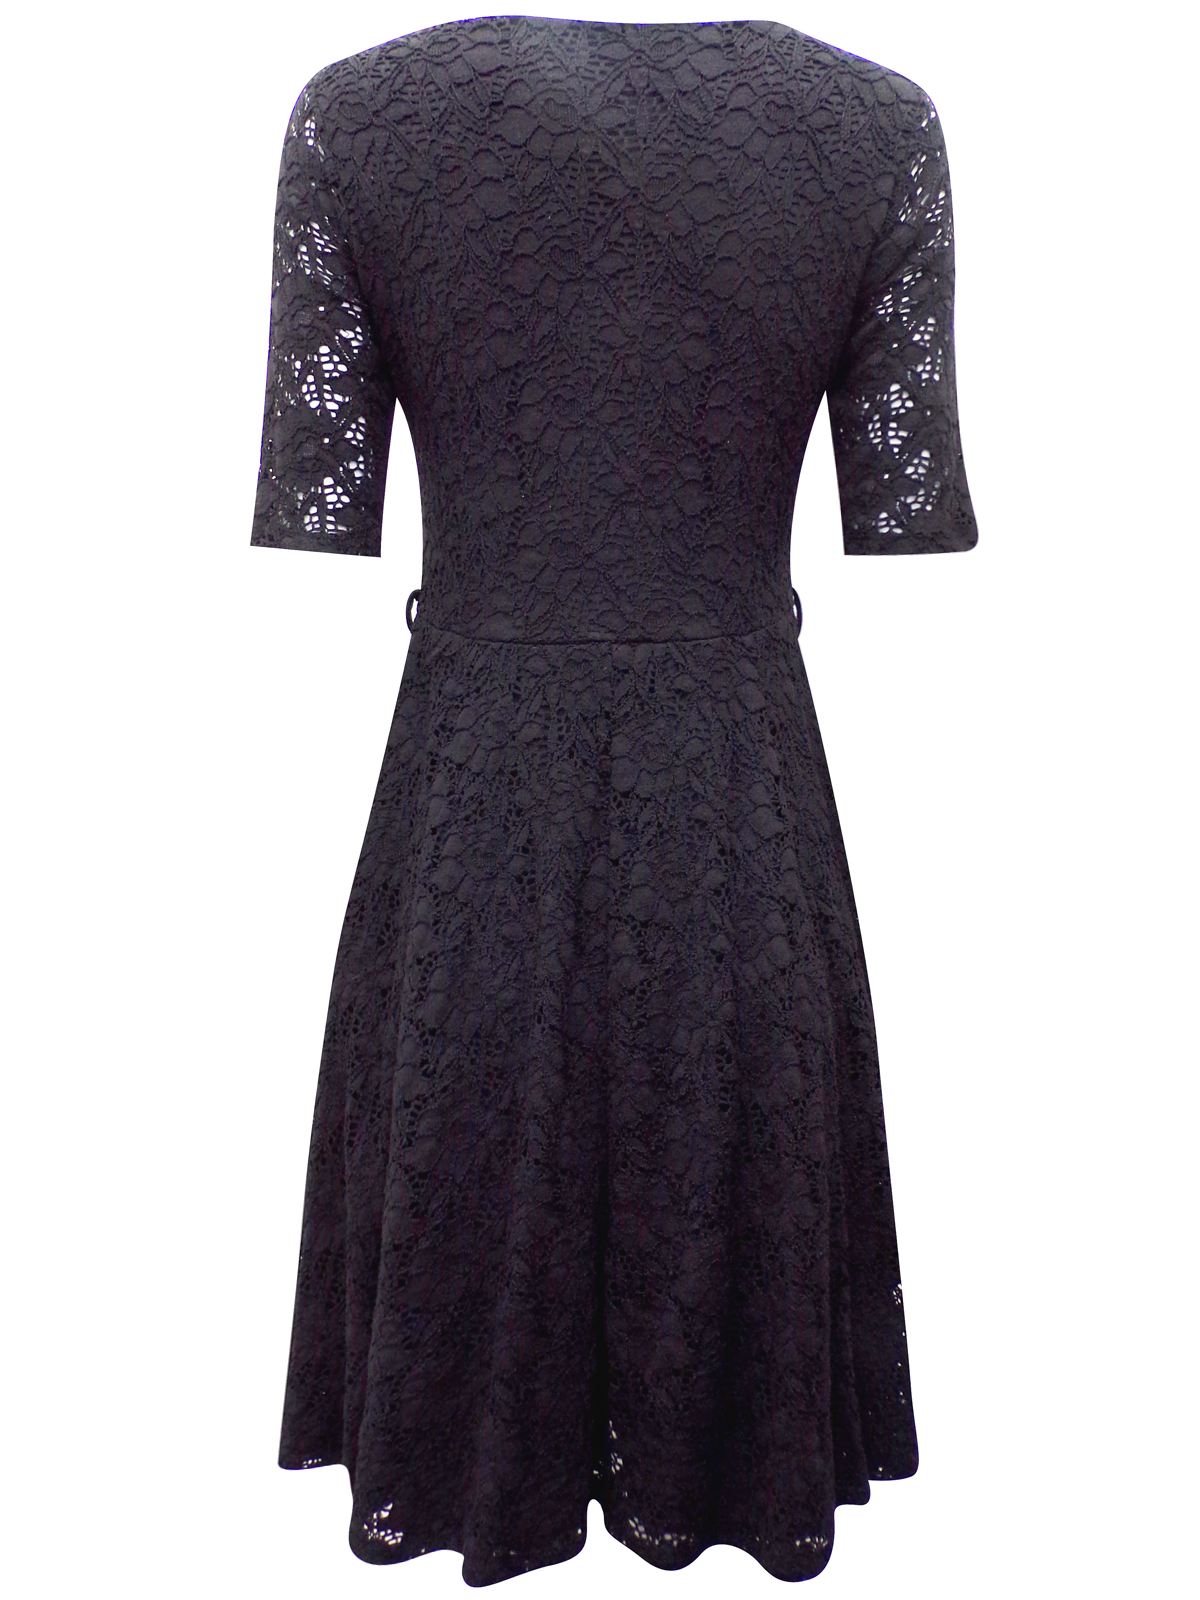 //text.. - - BLACK Floral Lace Fit & Flare Dress - Size 12 to 18